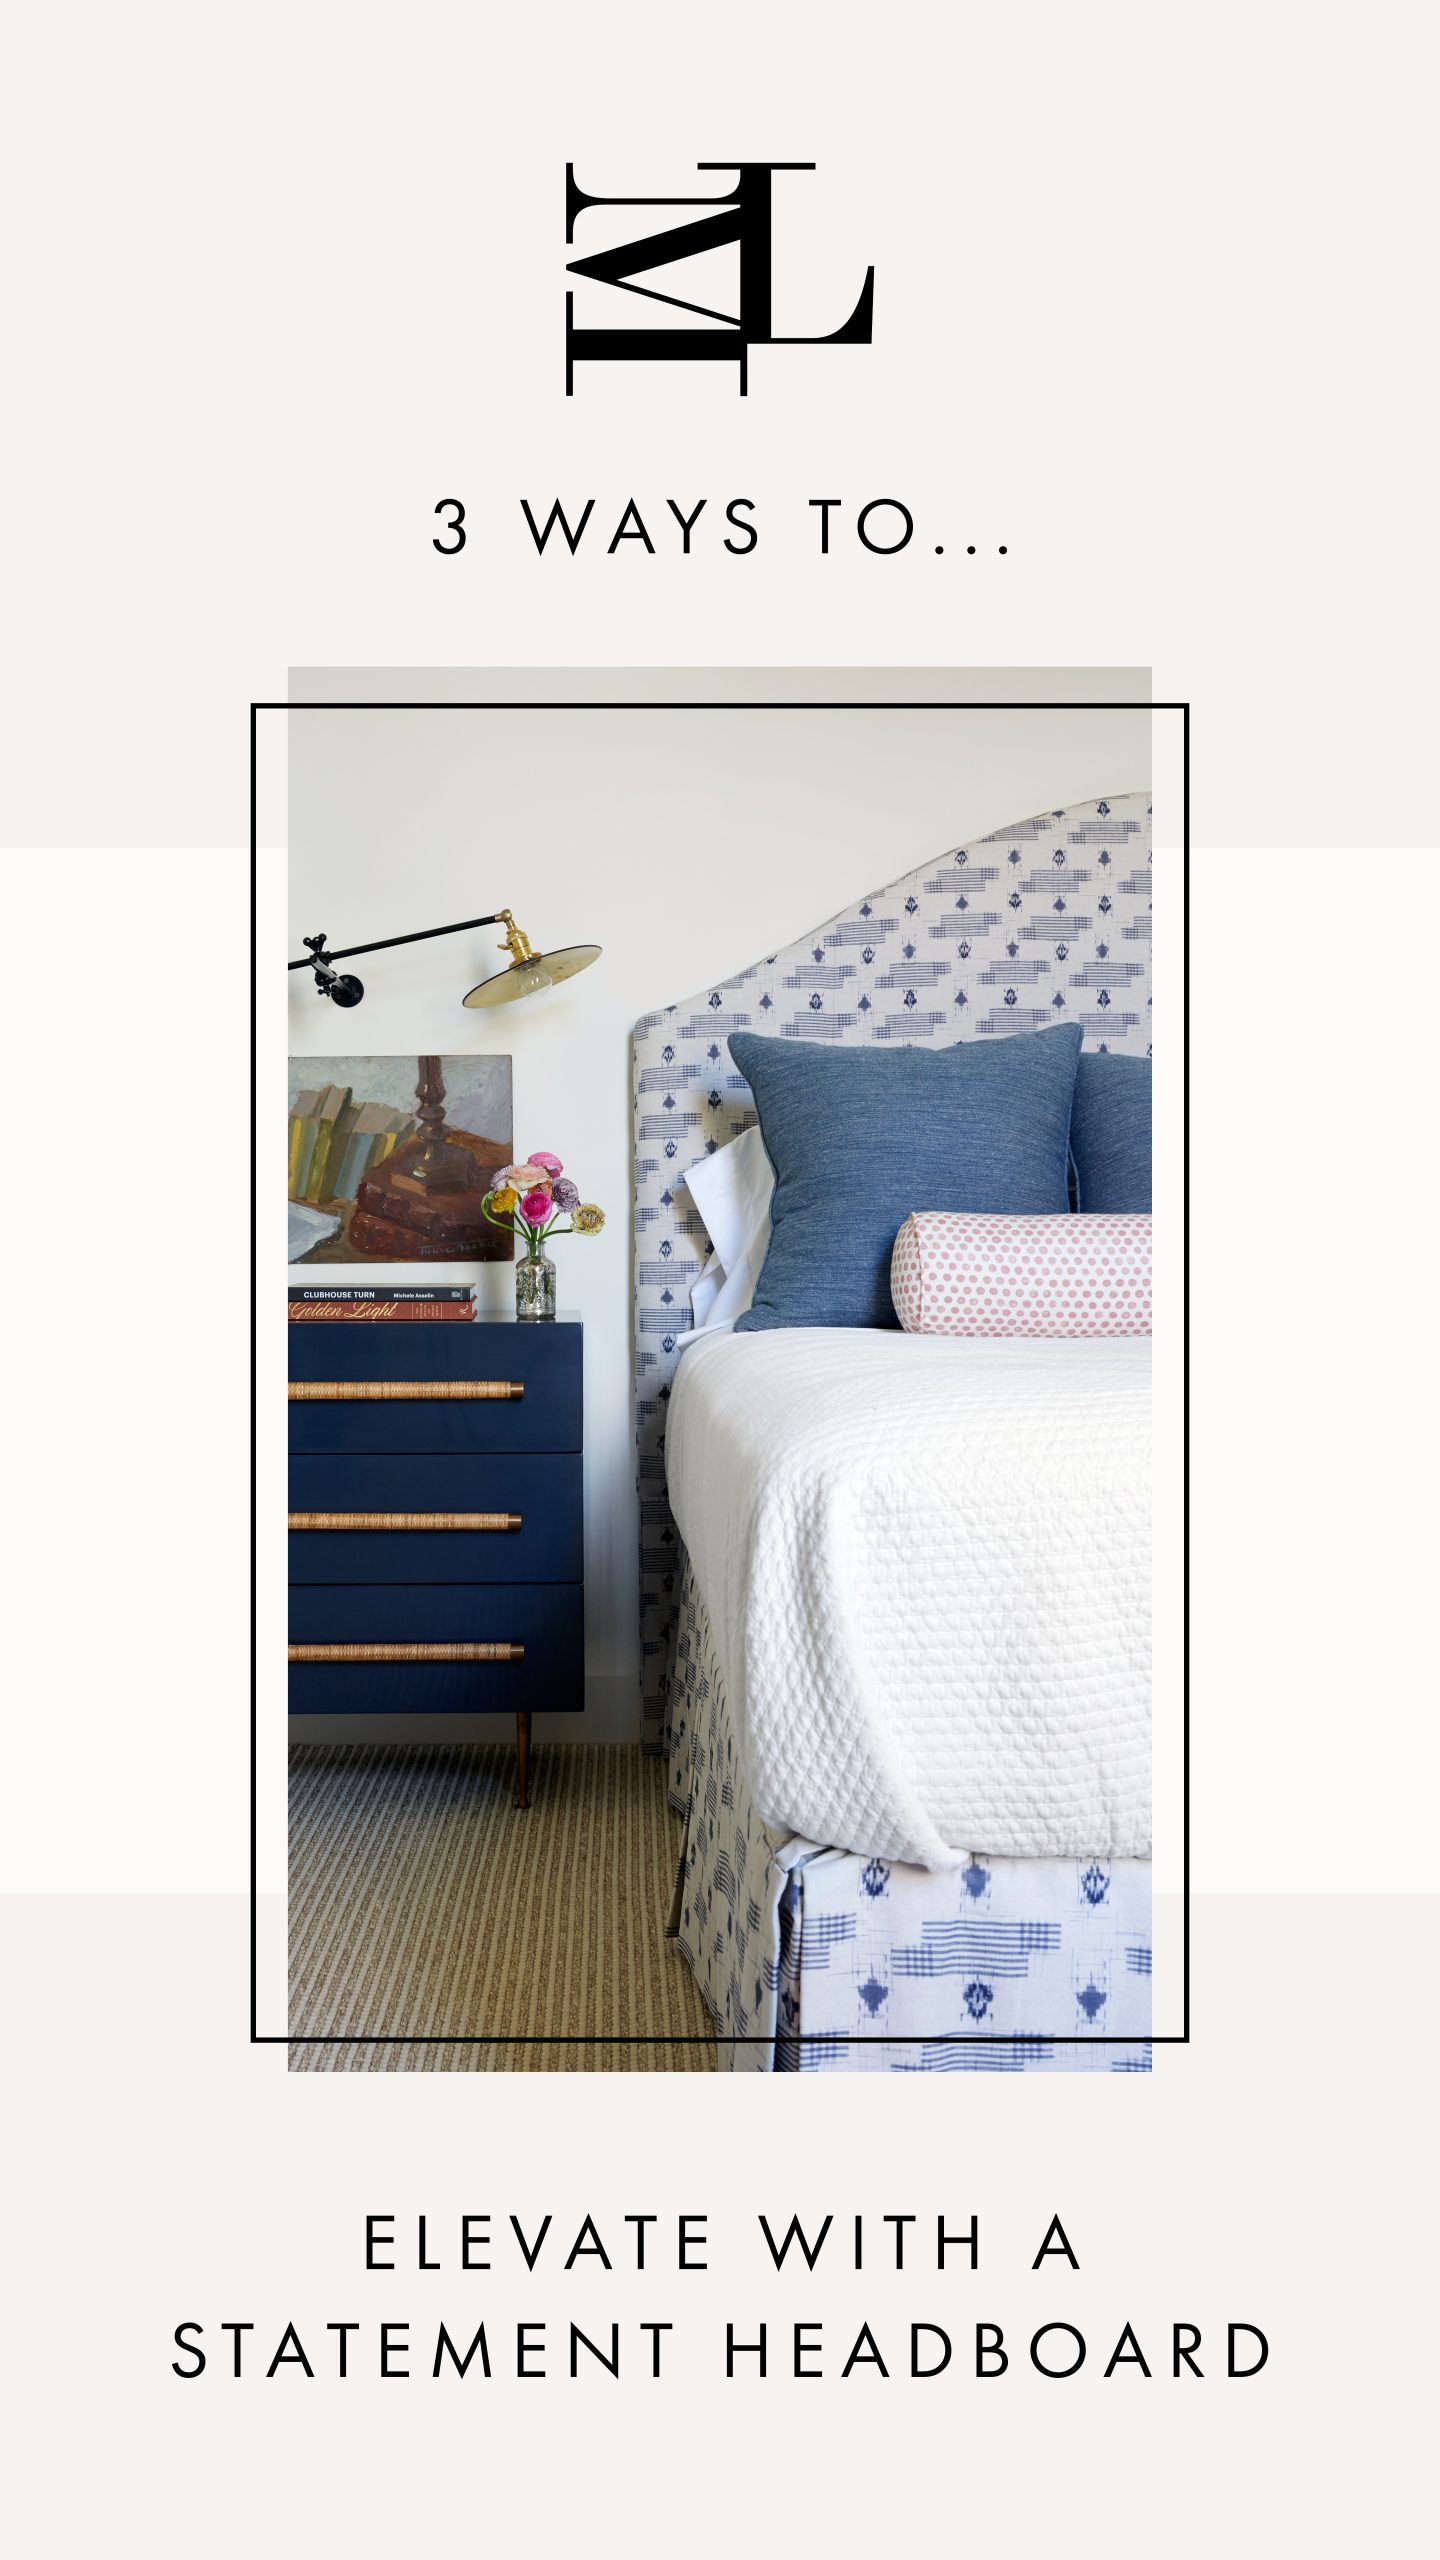 3 Ways To: Elevate with a statement headboard